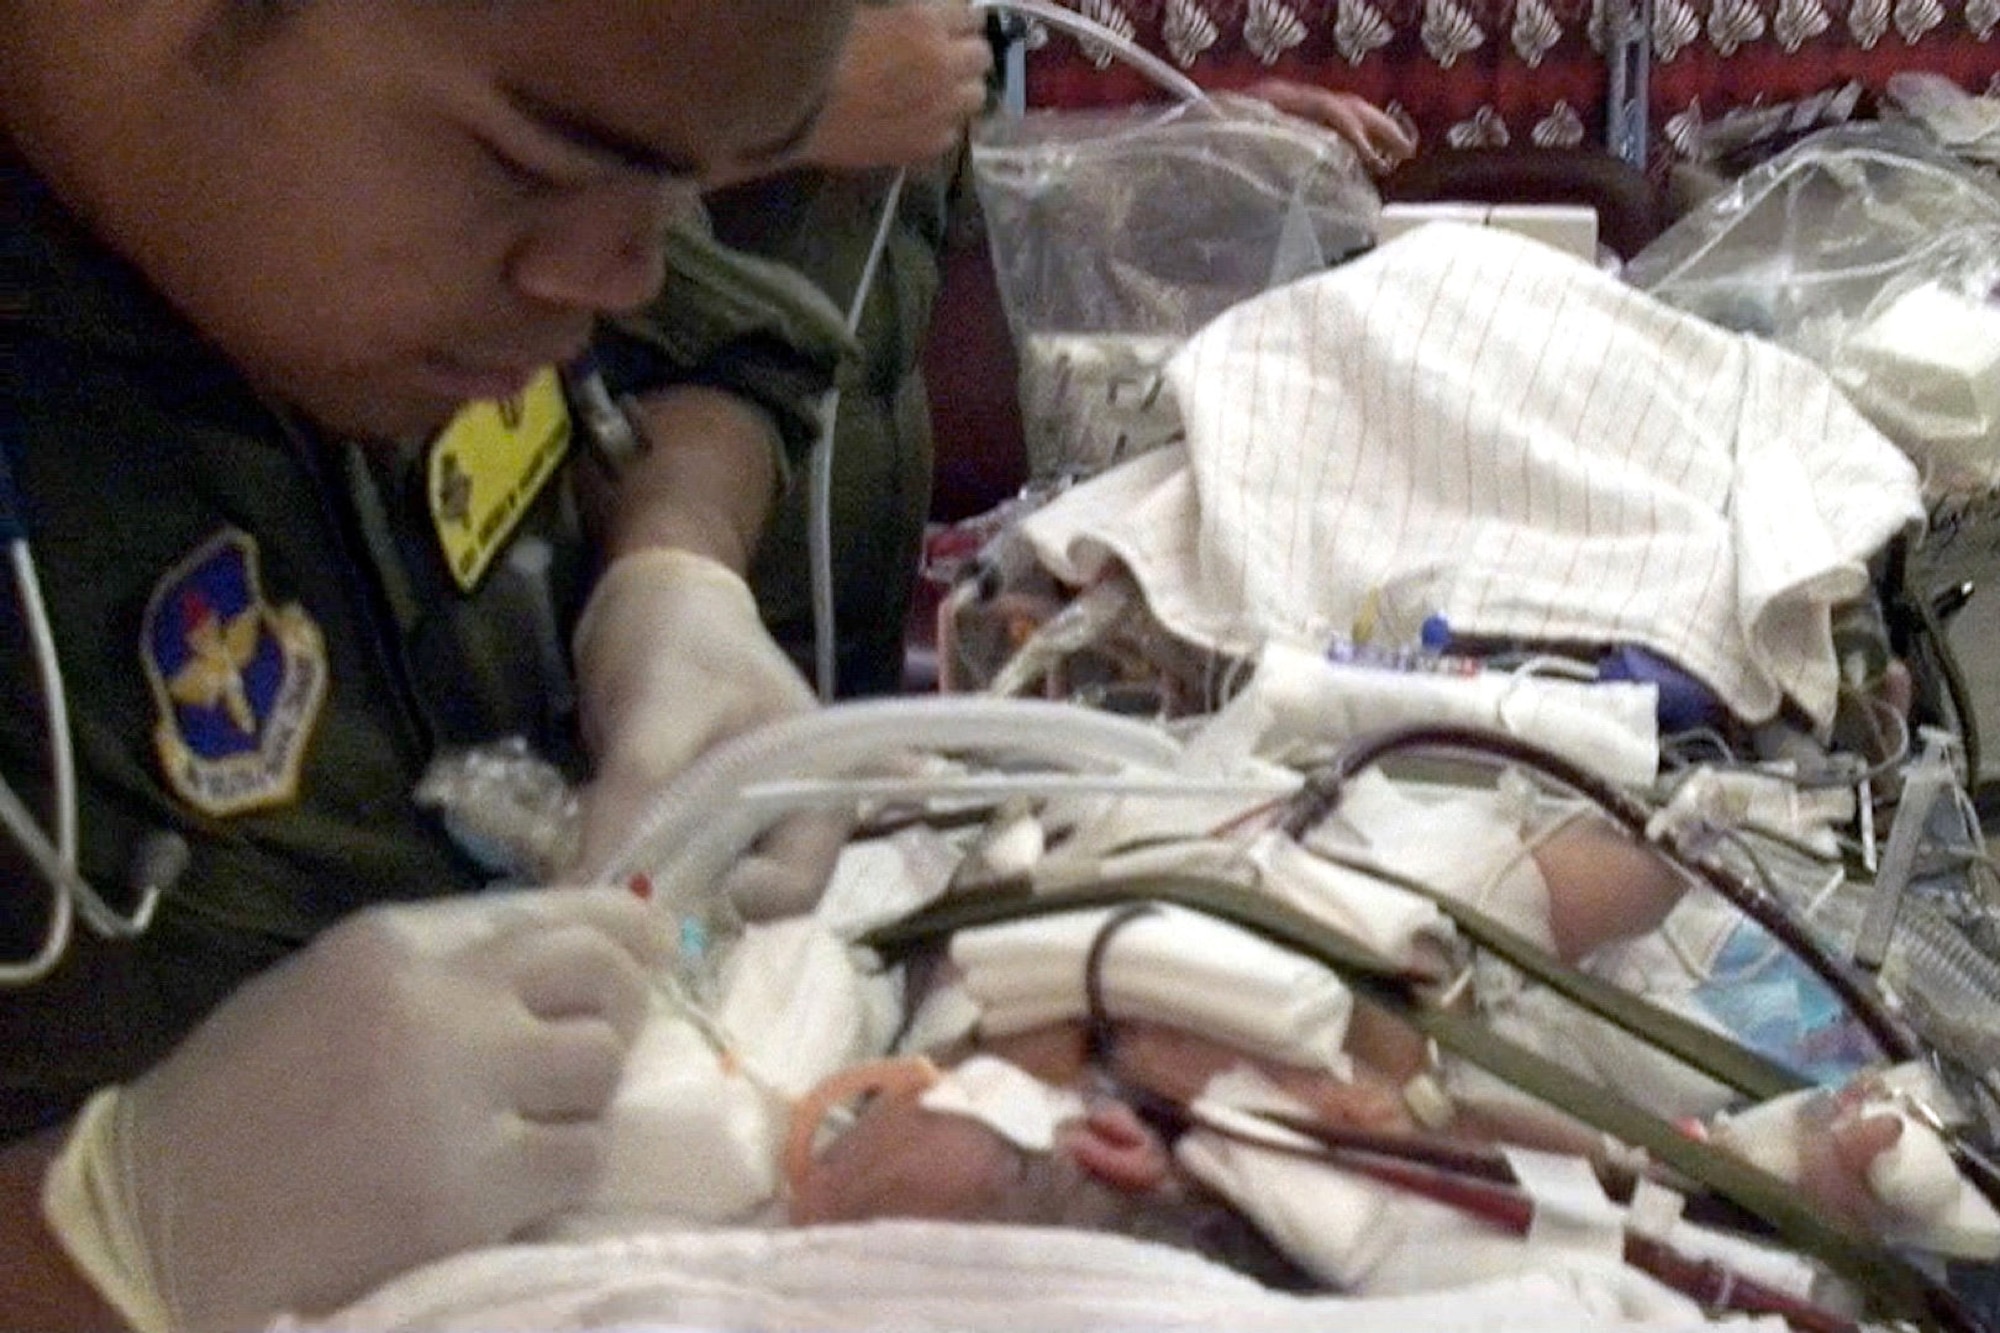 Airman 1st Class Andrew Pamintuan suctions the infant's endotracheal tube on the Wilford Hall Medical Center's extra corporeal membrane oxygenation transport cart in the neonatal intensive care unit at the Kapiolani Medical Center in Honolulu July 22. The ECMO team was needed to transport the critically ill infant to California for advanced medical treatment. Airman Pamintuan is a neonatal intensive care unit respiratory therapist assigned to the 59th Medical Operations Squadron. (U. S. Air Force photo/Maj. Kreangkai Tyree)